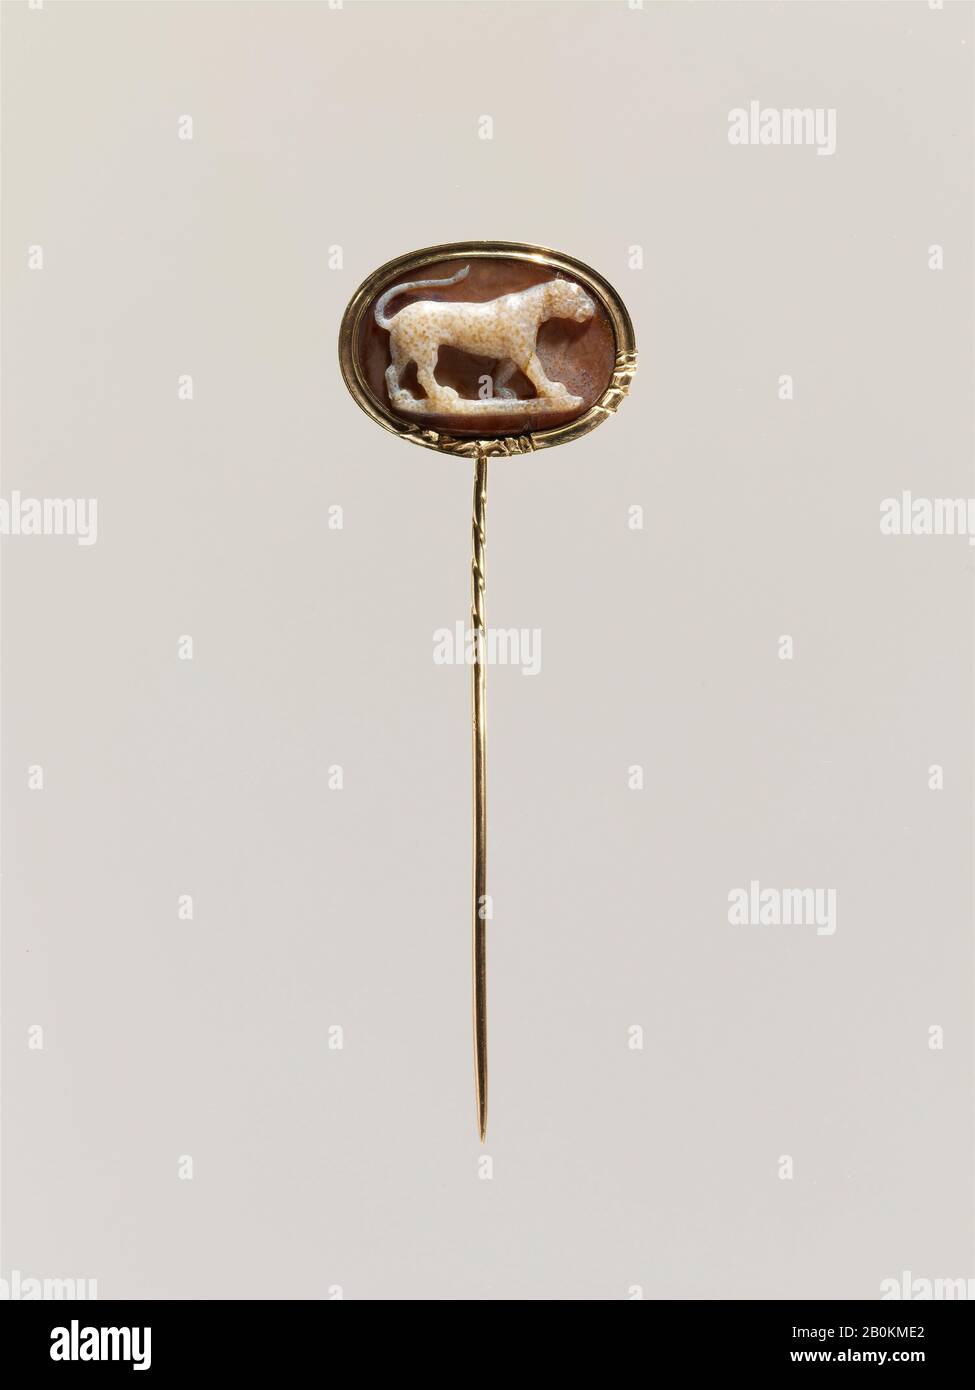 Walking leopard, Italian, 18th century, Italian, Sardonyx, mounted in gold as a pin, subsequently gouged, Overall: 7/8 x 1 3/16 in. (2.3 x 3.1 cm); visible cameo: 18.6 x 27 mm, Lapidary Work-Gems Stock Photo